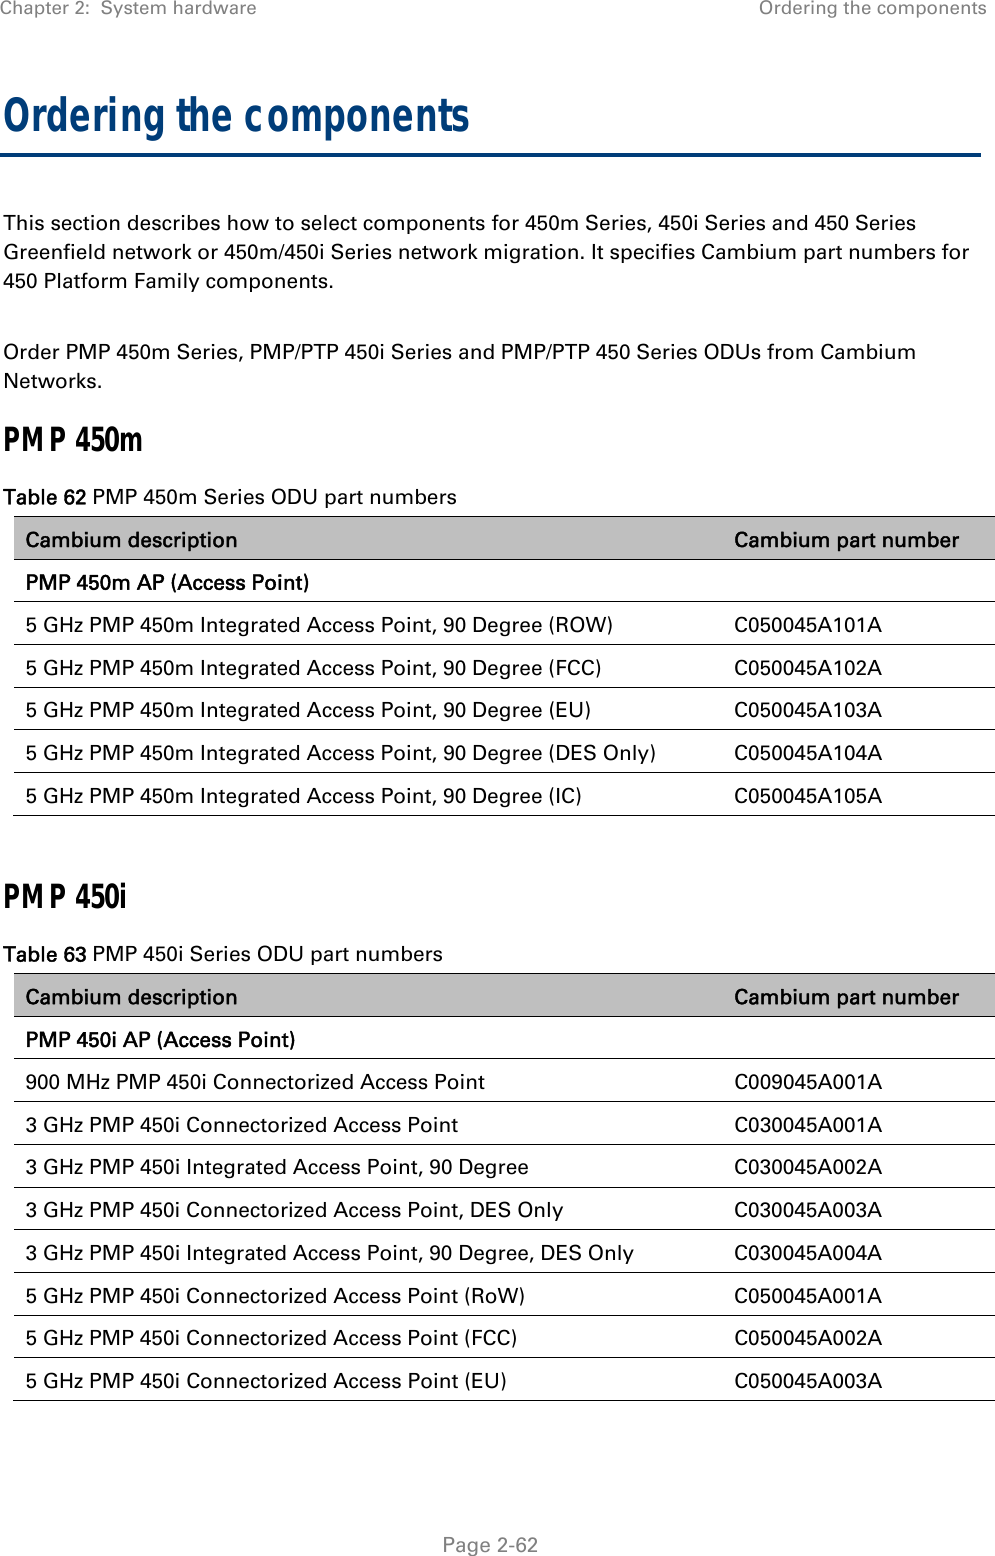 Chapter 2:  System hardware  Ordering the components   Page 2-62 Ordering the components This section describes how to select components for 450m Series, 450i Series and 450 Series Greenfield network or 450m/450i Series network migration. It specifies Cambium part numbers for 450 Platform Family components.  Order PMP 450m Series, PMP/PTP 450i Series and PMP/PTP 450 Series ODUs from Cambium Networks.  PMP 450m Table 62 PMP 450m Series ODU part numbers Cambium description  Cambium part number PMP 450m AP (Access Point)    5 GHz PMP 450m Integrated Access Point, 90 Degree (ROW)  C050045A101A 5 GHz PMP 450m Integrated Access Point, 90 Degree (FCC)  C050045A102A 5 GHz PMP 450m Integrated Access Point, 90 Degree (EU)  C050045A103A 5 GHz PMP 450m Integrated Access Point, 90 Degree (DES Only)  C050045A104A 5 GHz PMP 450m Integrated Access Point, 90 Degree (IC)  C050045A105A  PMP 450i Table 63 PMP 450i Series ODU part numbers Cambium description  Cambium part number PMP 450i AP (Access Point)    900 MHz PMP 450i Connectorized Access Point  C009045A001A 3 GHz PMP 450i Connectorized Access Point  C030045A001A 3 GHz PMP 450i Integrated Access Point, 90 Degree  C030045A002A 3 GHz PMP 450i Connectorized Access Point, DES Only  C030045A003A 3 GHz PMP 450i Integrated Access Point, 90 Degree, DES Only  C030045A004A 5 GHz PMP 450i Connectorized Access Point (RoW)  C050045A001A 5 GHz PMP 450i Connectorized Access Point (FCC)  C050045A002A 5 GHz PMP 450i Connectorized Access Point (EU)  C050045A003A 